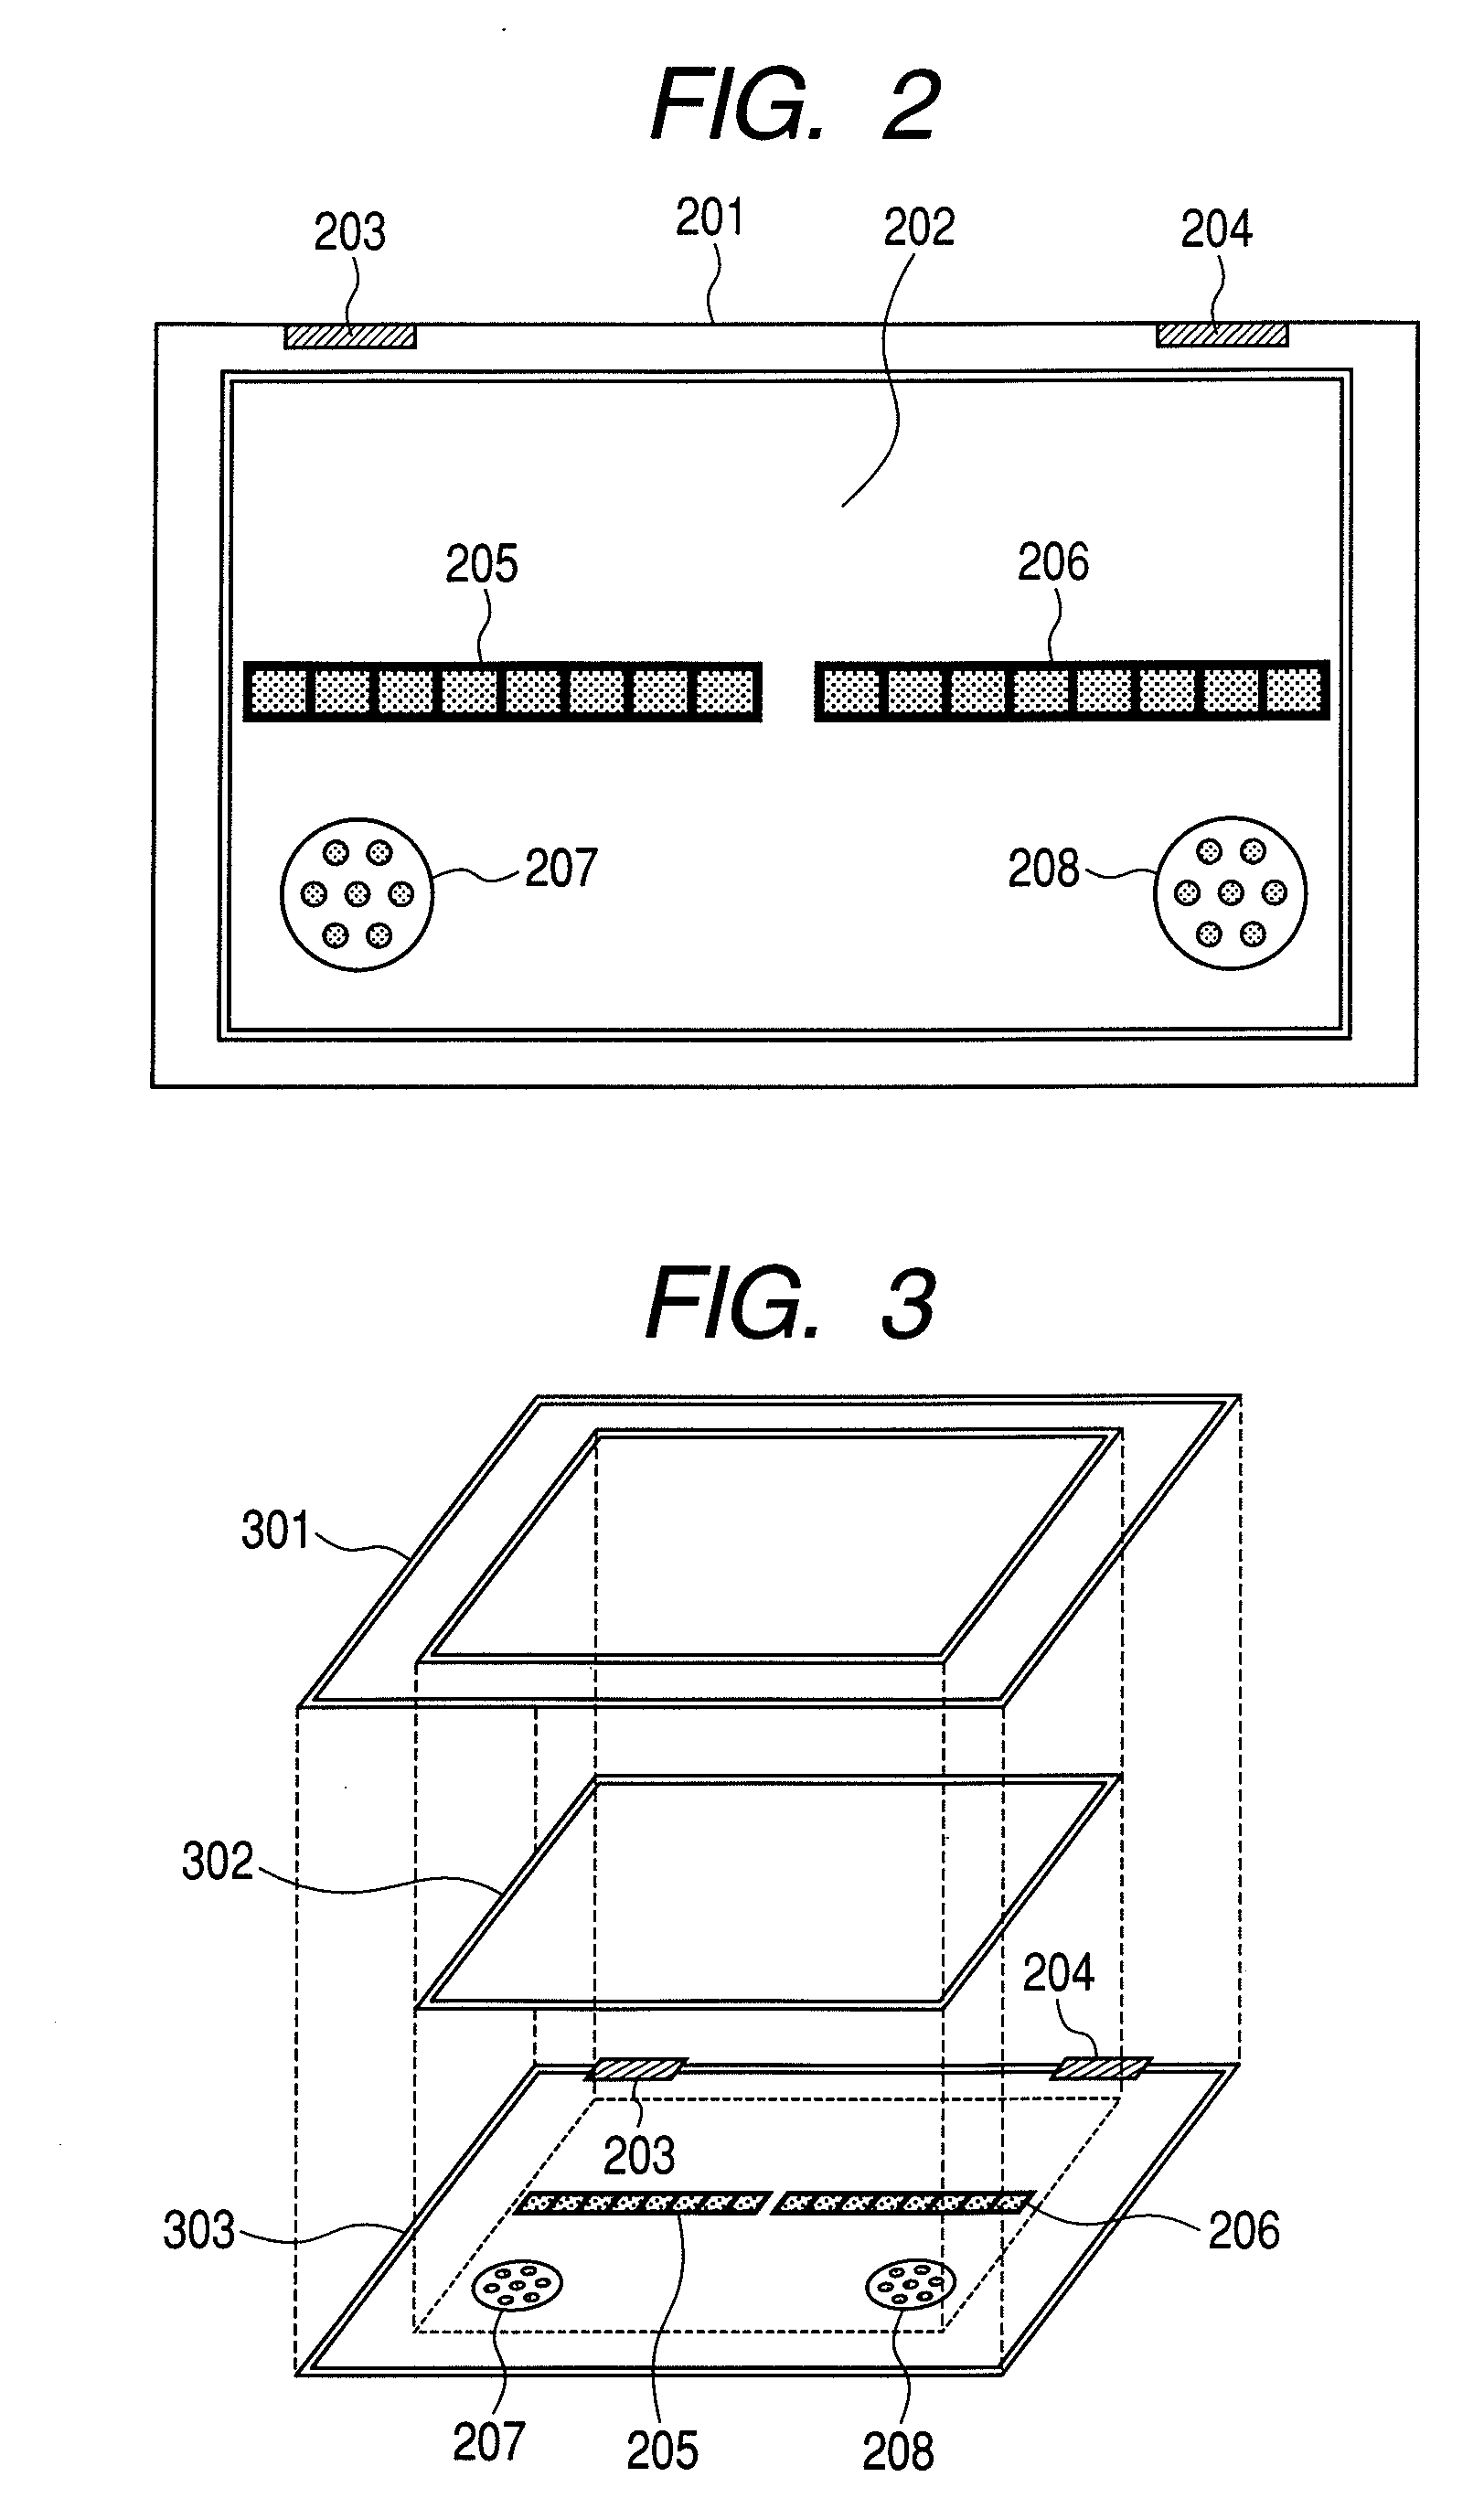 Flexible information display terminal and interface for information display